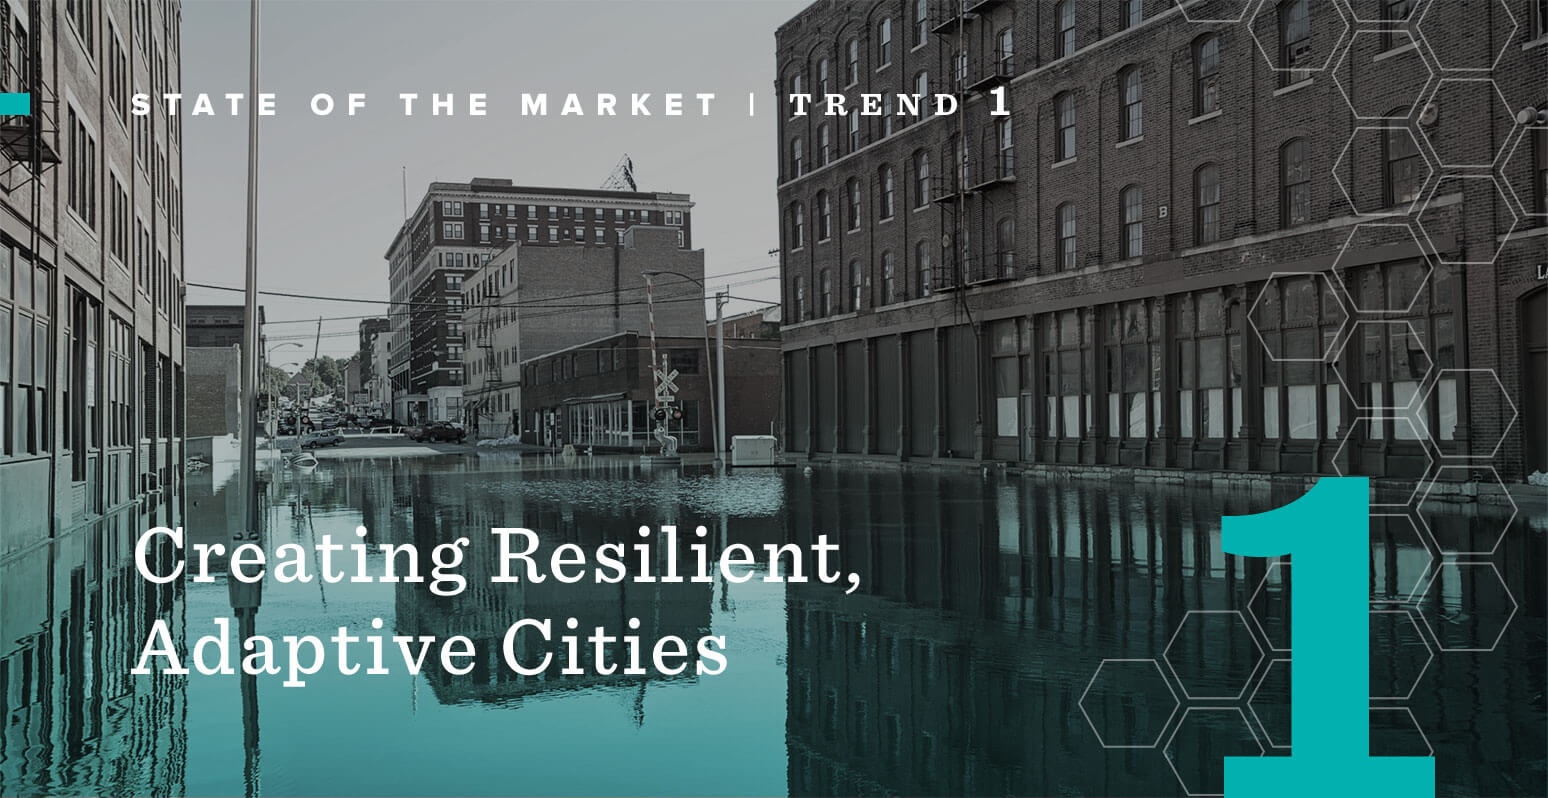 State of the Market: Trend 1 - Creating Resilient, Adaptive Cities